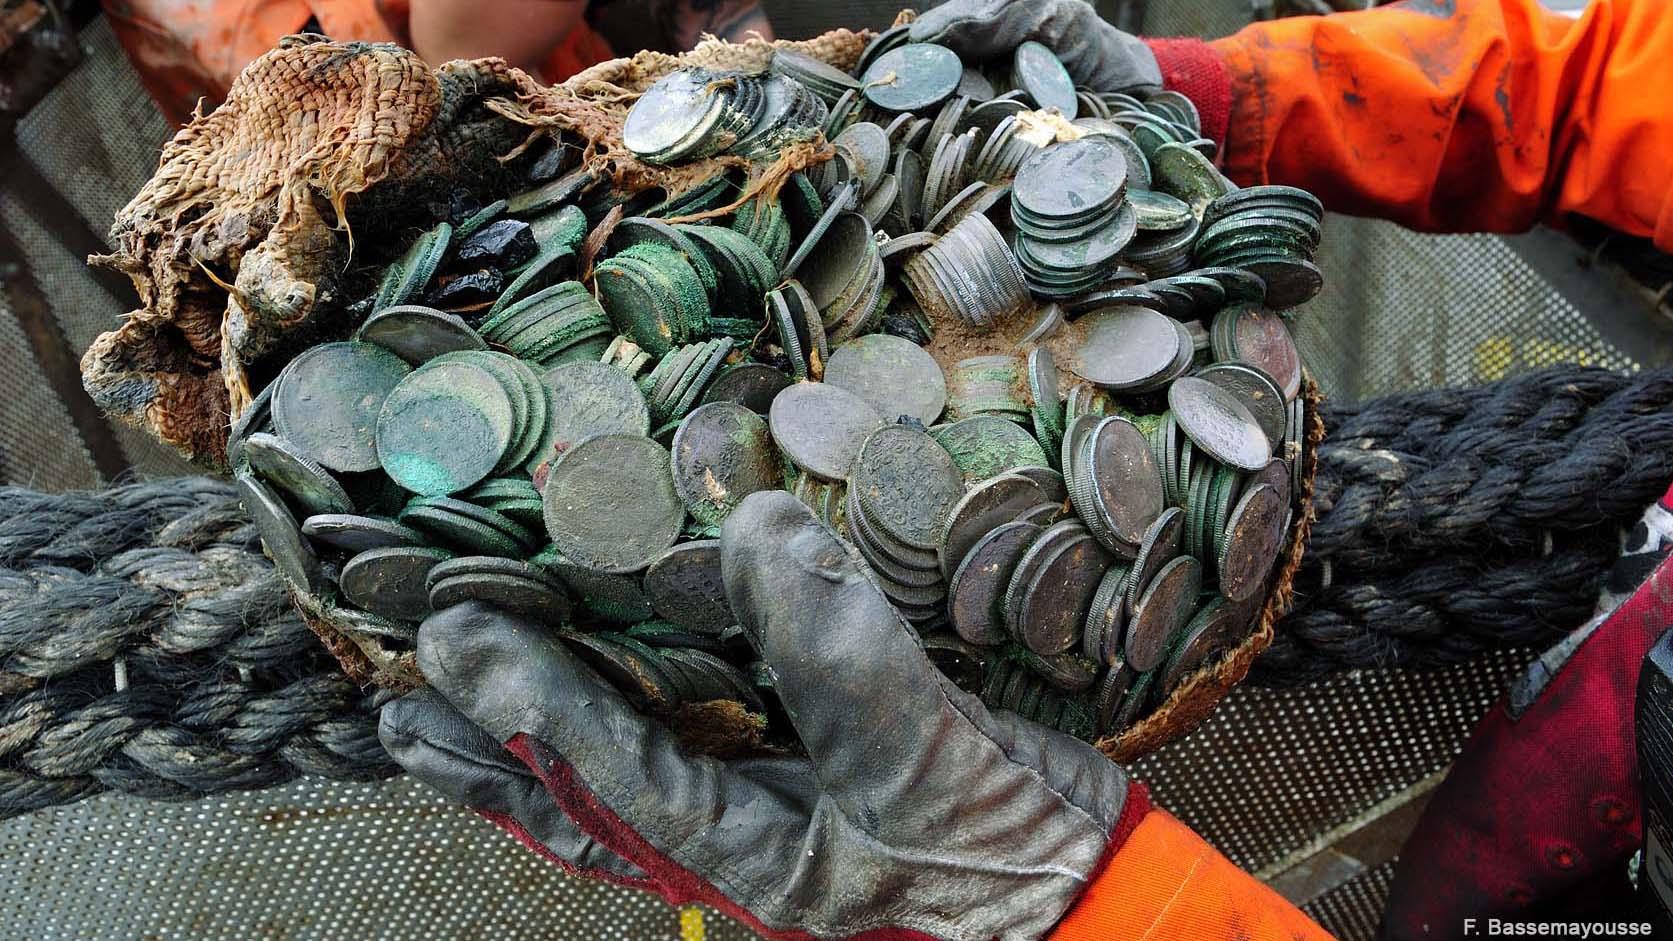 Some of the haul of silver coins from the City of Cairo